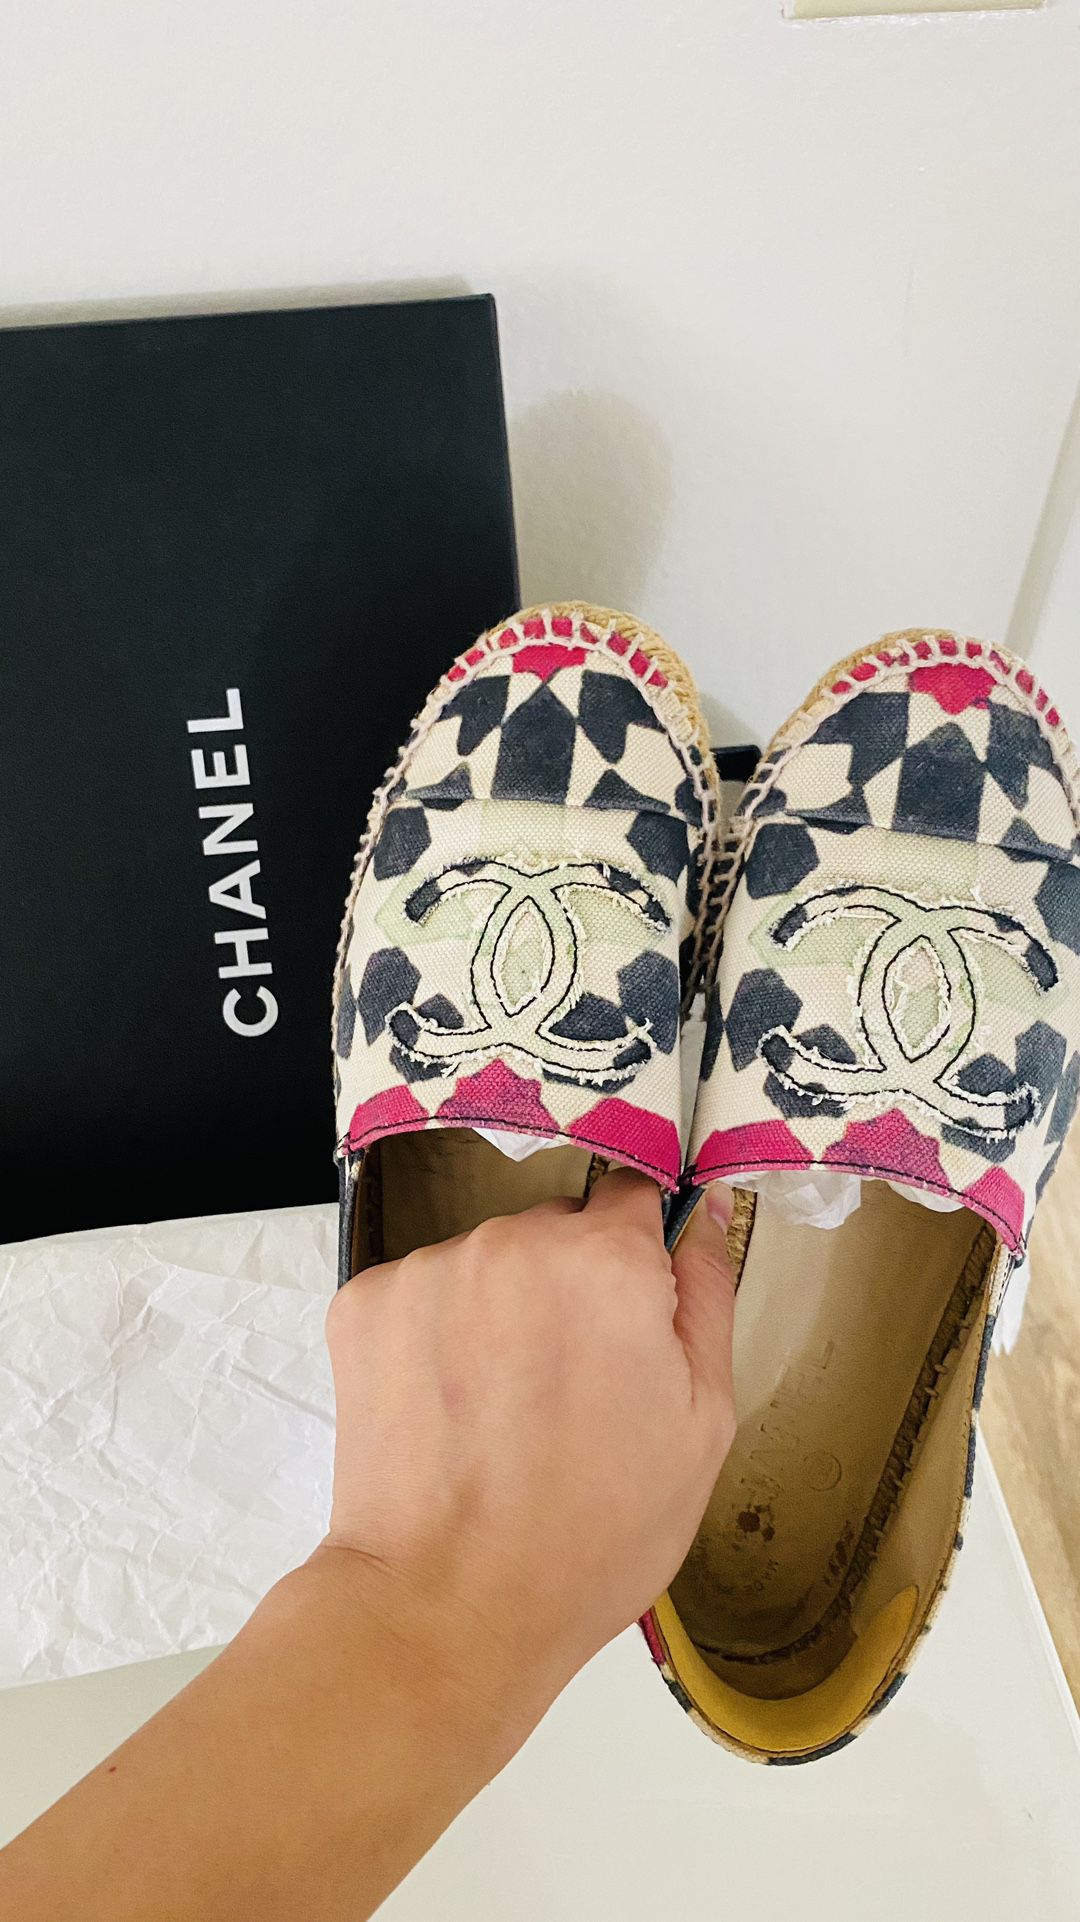 Pre-Owned CHANEL Shoes - FARFETCH